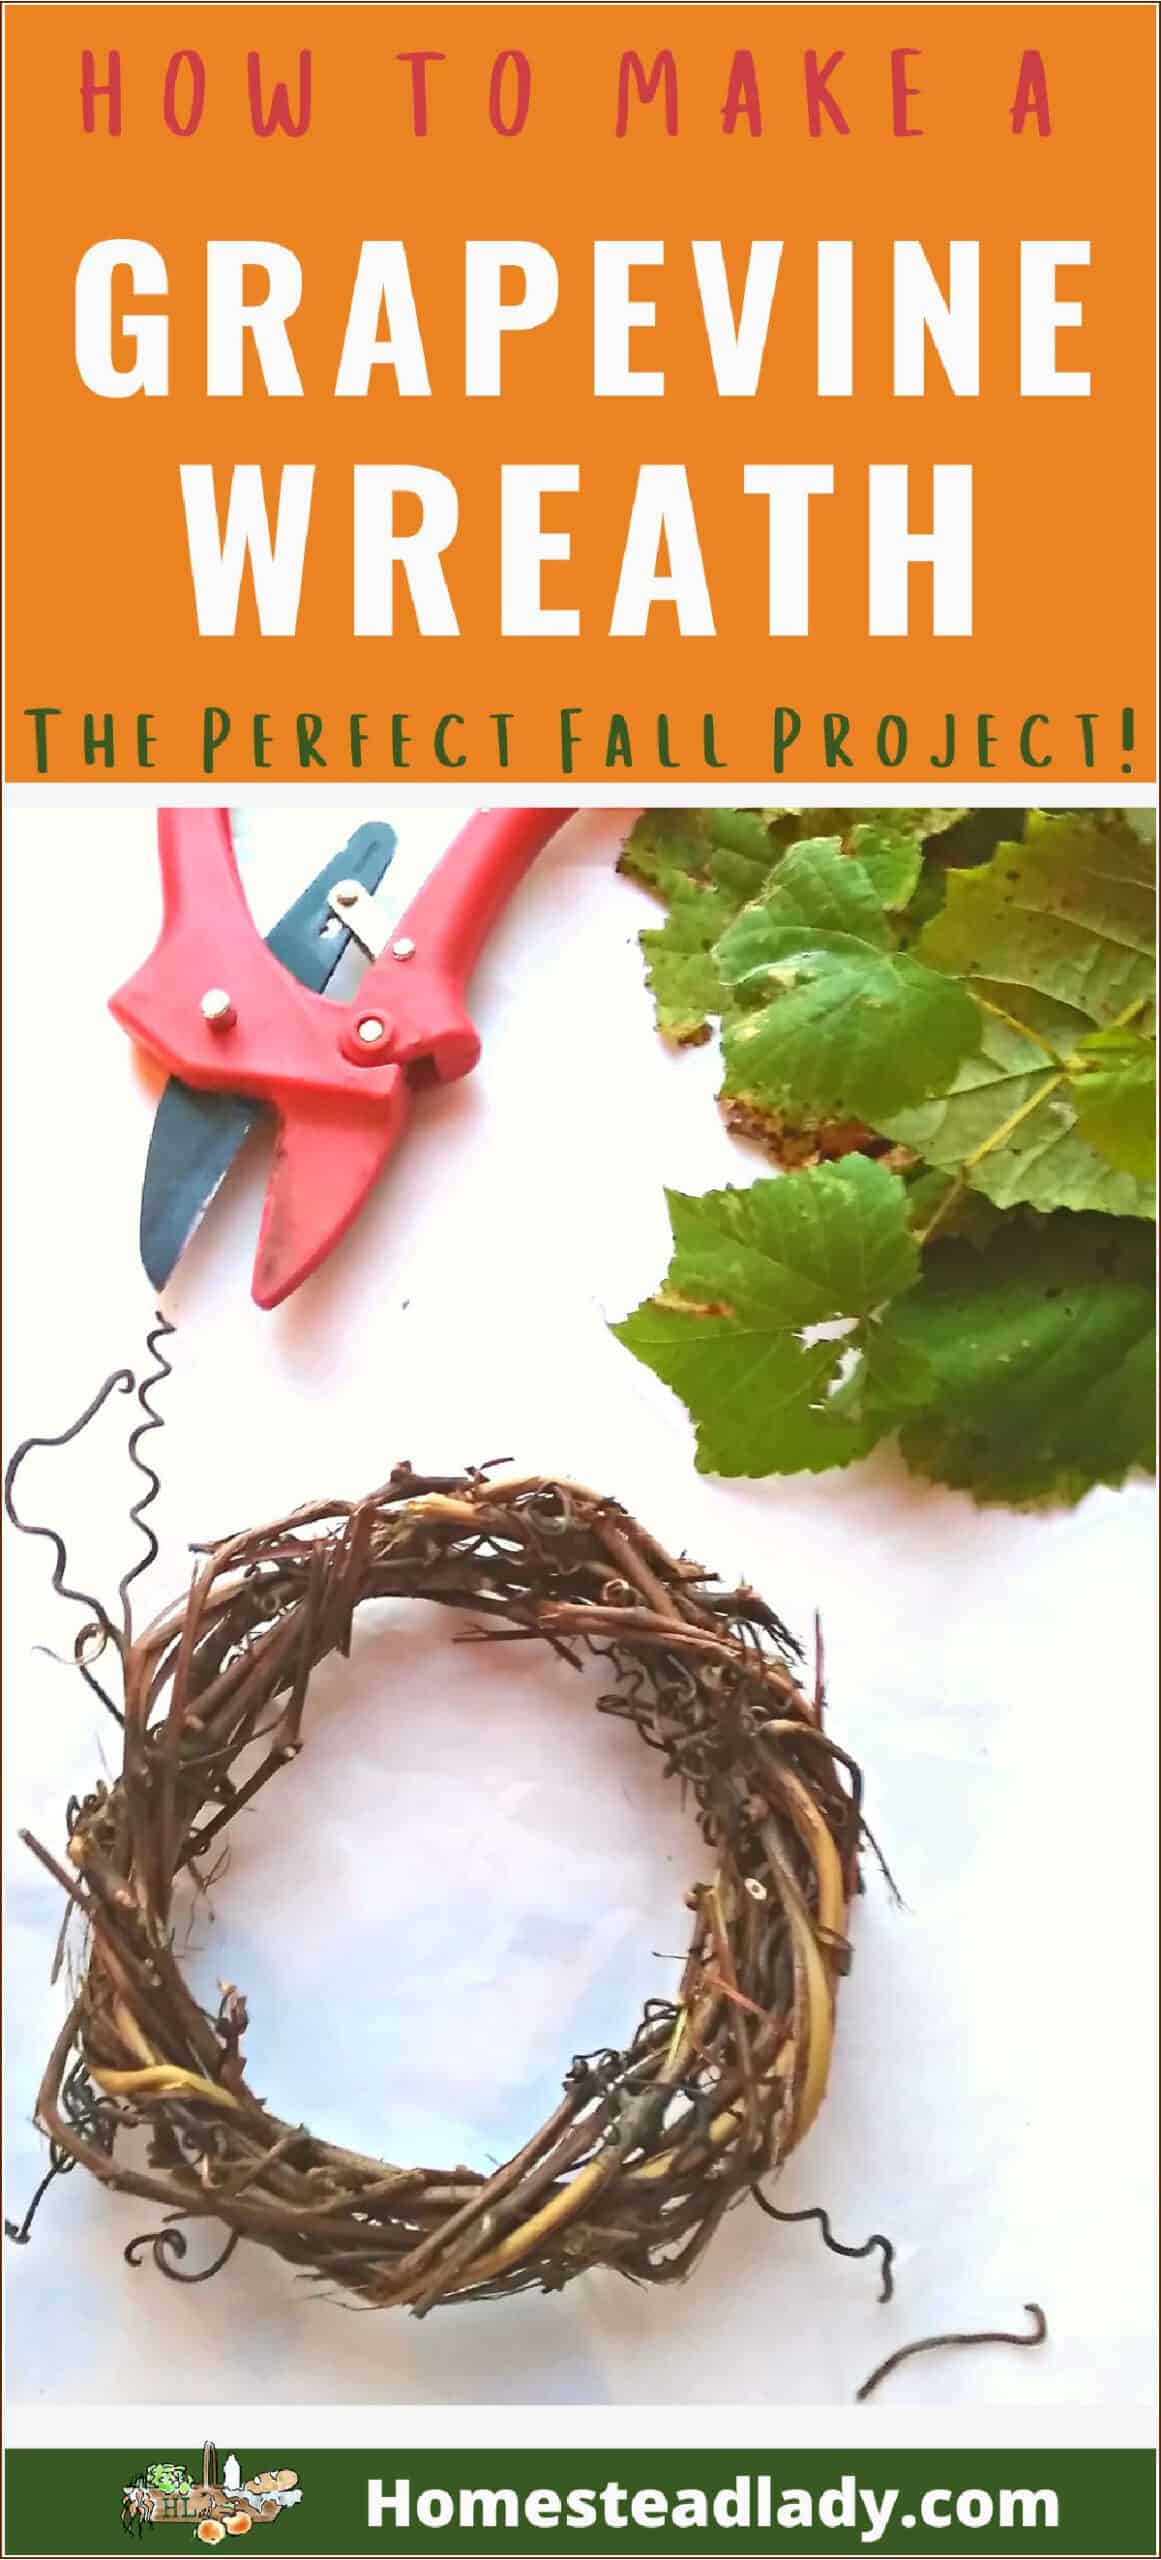 garden clippers, grapevine leaves, homemade grapevine wreath